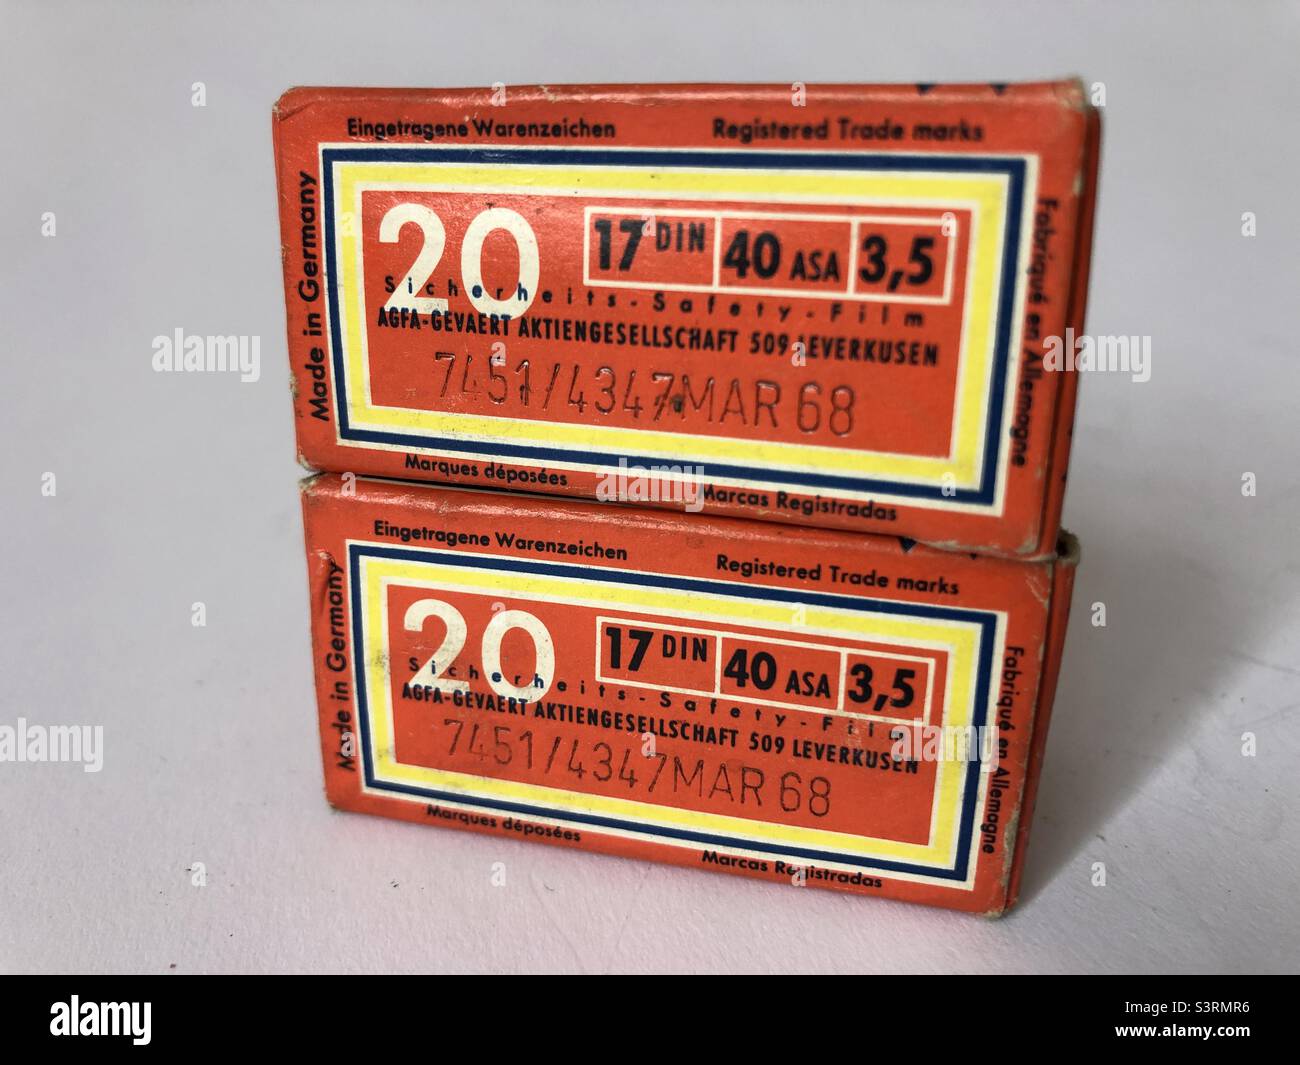 Expired photographic Films that are expired in 1968 Stock Photo